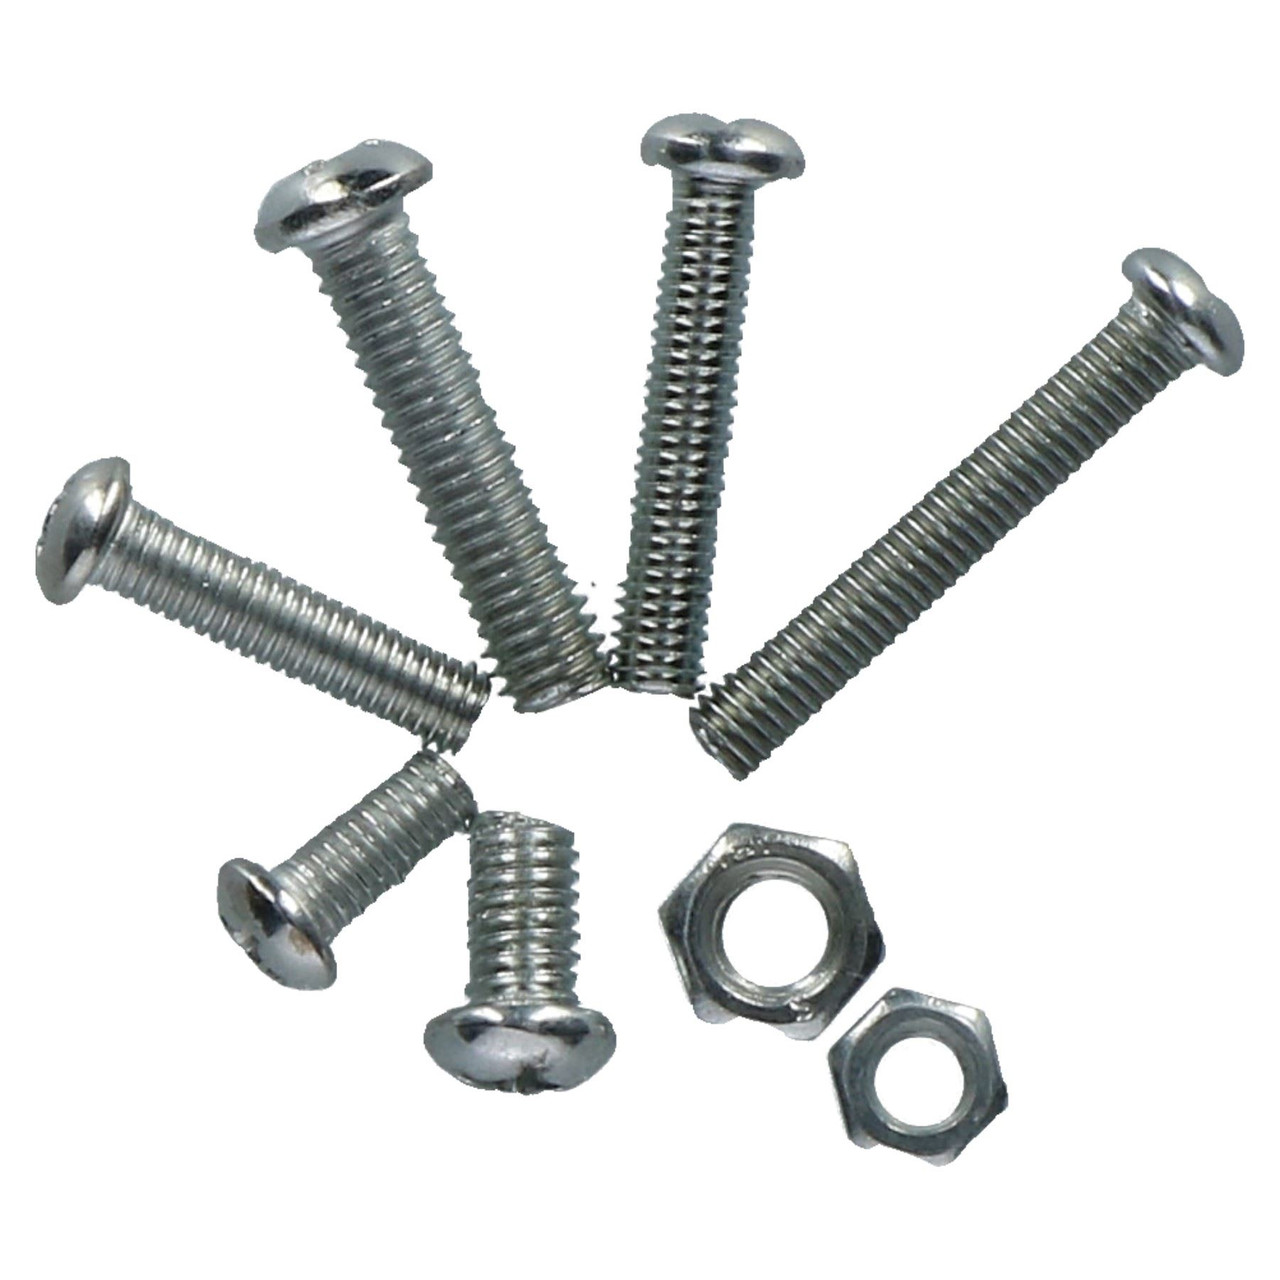 Nuts and Bolts Washers Phillips Dome Head Bolt-Screw Metric M5 M6 220pc  kit AB Tools Online